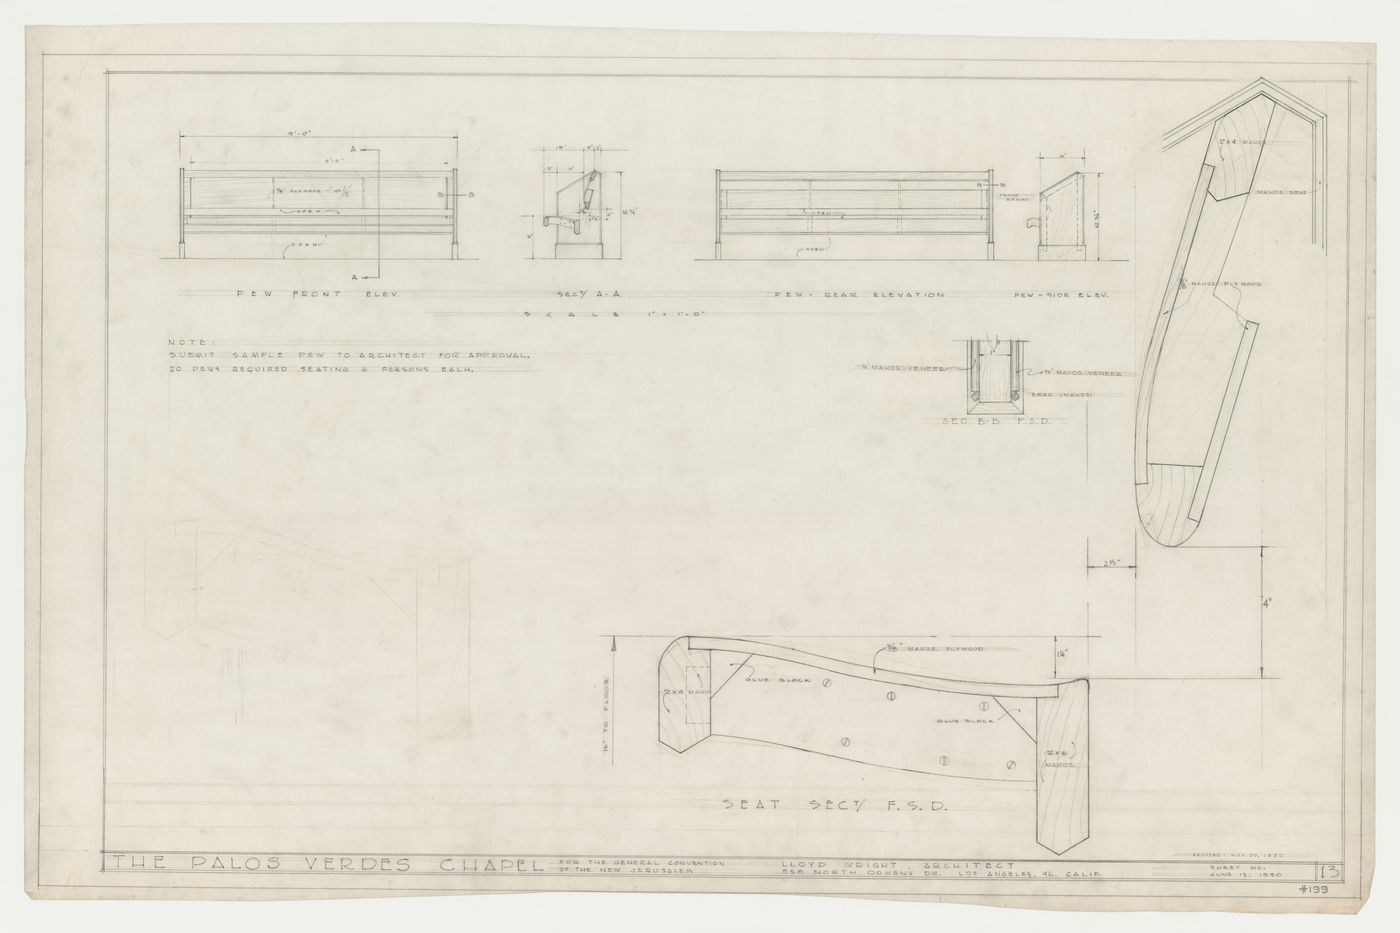 Wayfarers' Chapel, Palos Verdes, California: Elevations, sections and details for pews